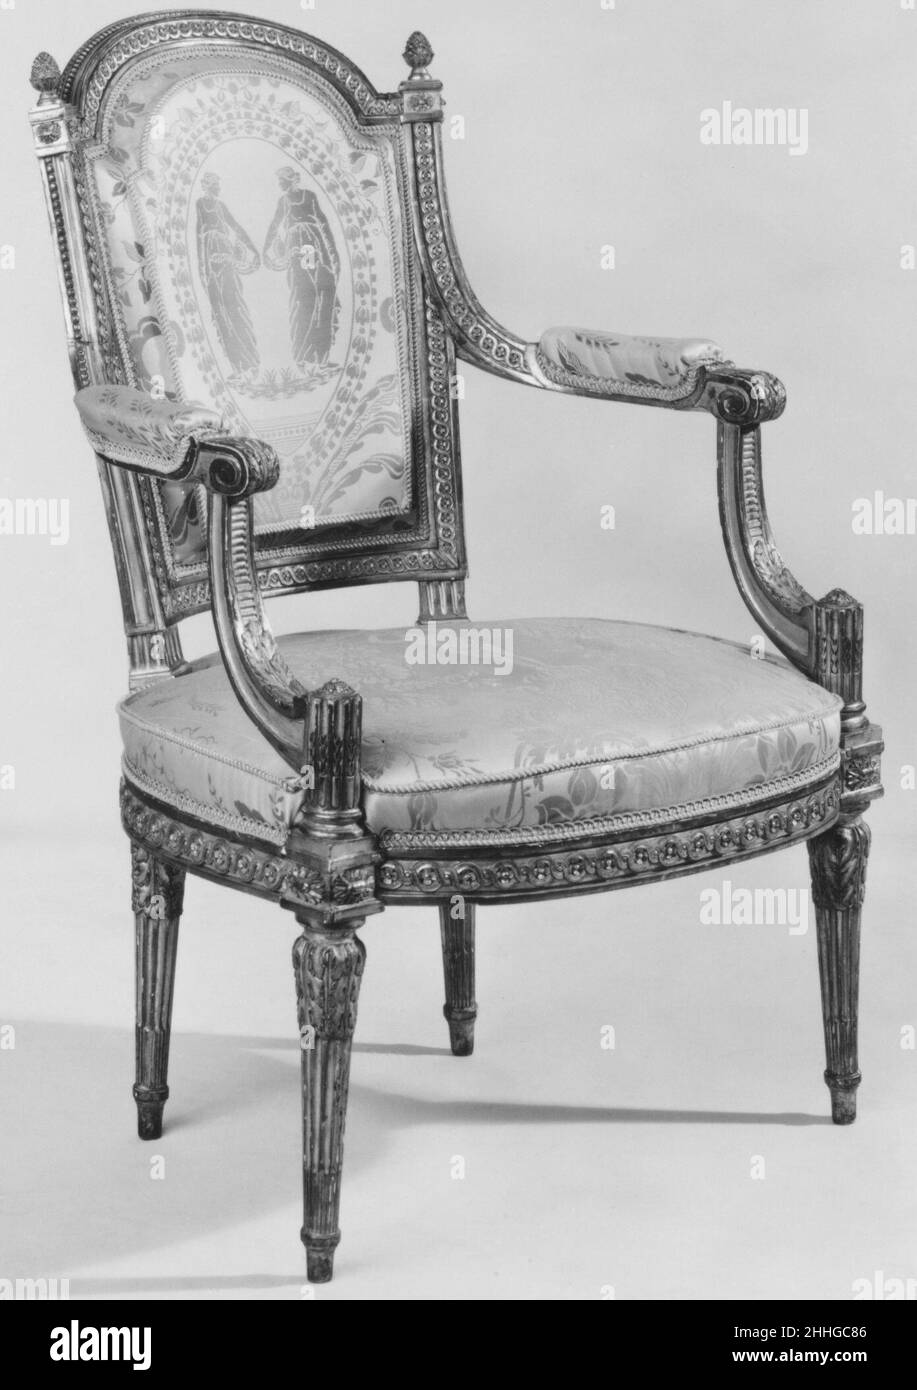 Armchair (fauteuil en cabriolet) (one of a pair) (part of a set) ca. 1785 Jean-Baptiste-Bernard Demay This pair of armchairs formerly belonged to the Marquise de Ganay just as the Neoclassical bergères à la reine by Demay also in the museum’s collection (1973.305.3). Made of carved and gilded beechwood, the armchairs have a slightly curved back. Two pinecone finials terminate the top rail while the decorative motifs of pearls and guilloches, acanthus scrolls, and columns are frequently found on Neoclassical furnishings created during the reign of Louis XVI. Seen together with the bergères (197 Stock Photo